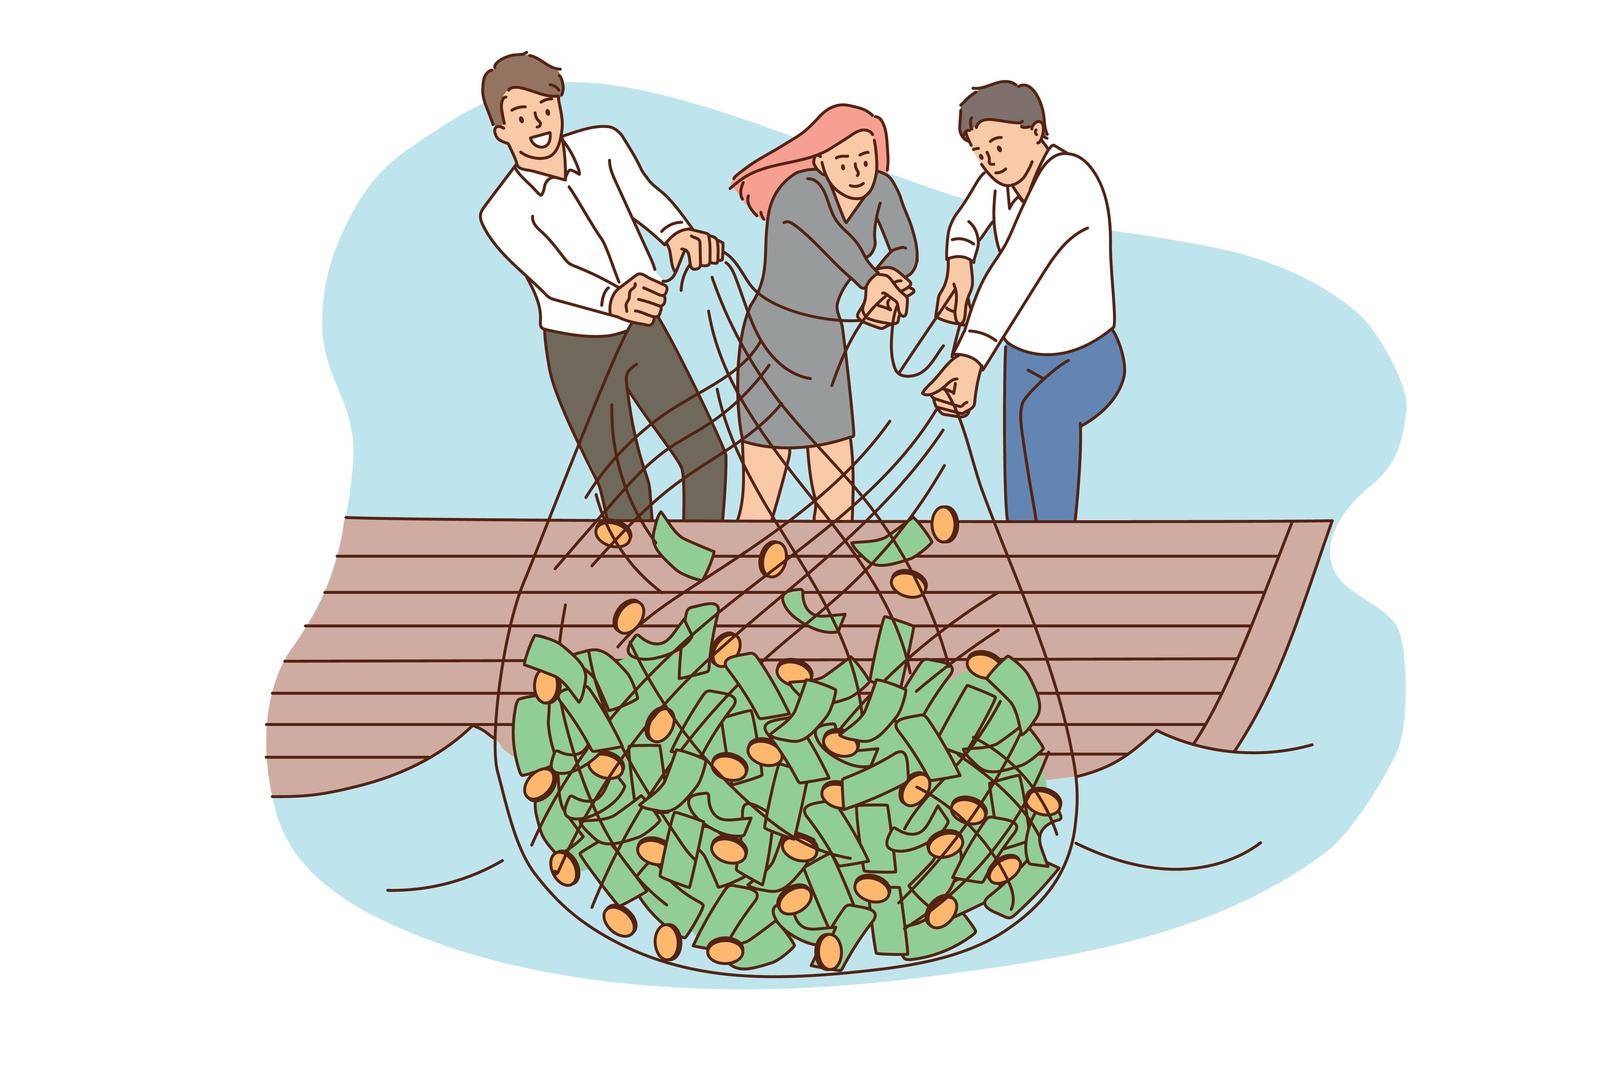 Profit, financial success, wealth concept. Group of young smiling business partners putting fishing sack with heaps of cash paper currency and coins vector illustration